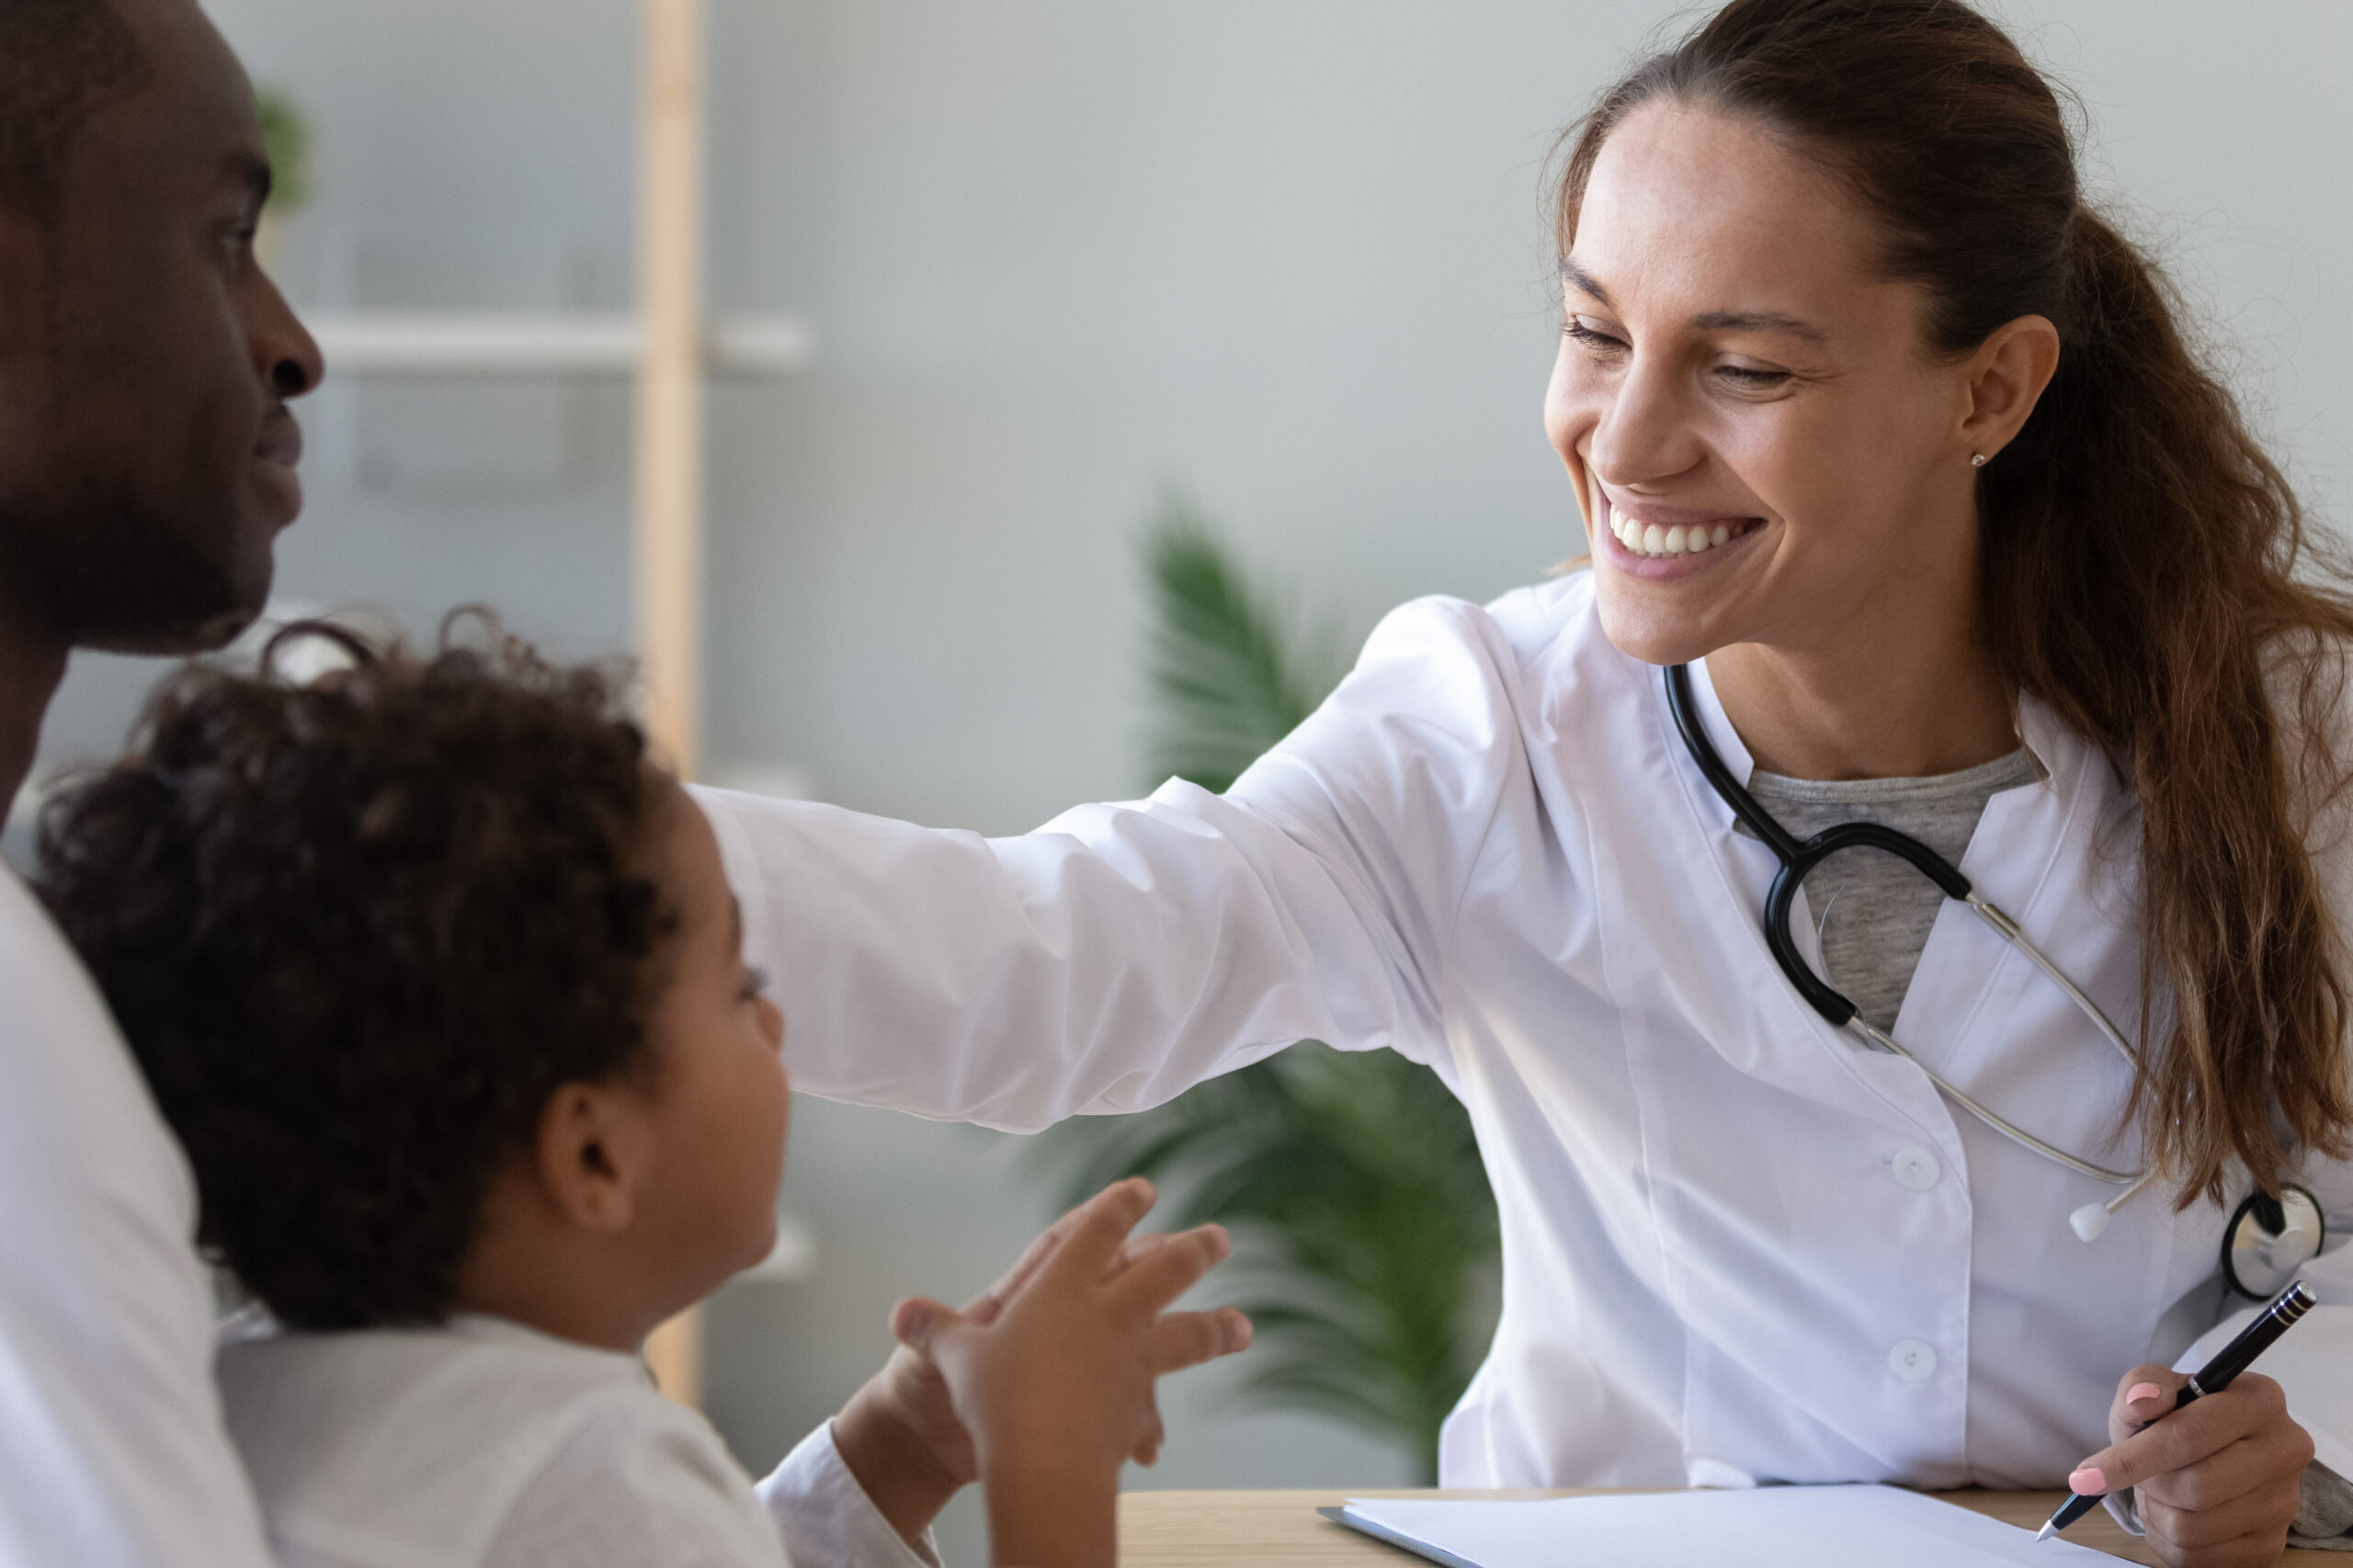 Featured image for “Preparing for Your Appointment: Maximize Your Time with Your Albuquerque Family Nurse Practitioner”